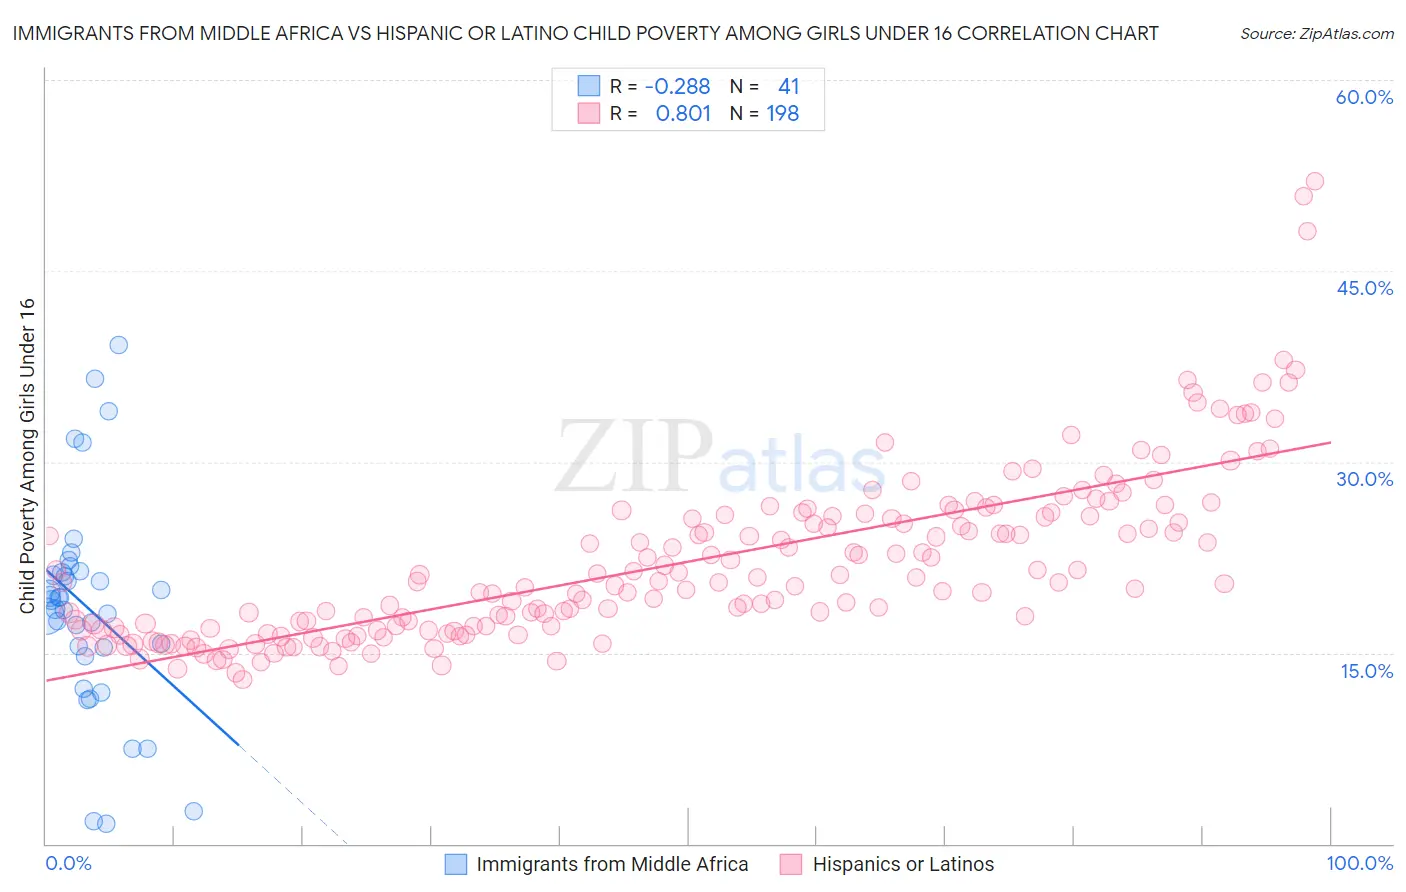 Immigrants from Middle Africa vs Hispanic or Latino Child Poverty Among Girls Under 16